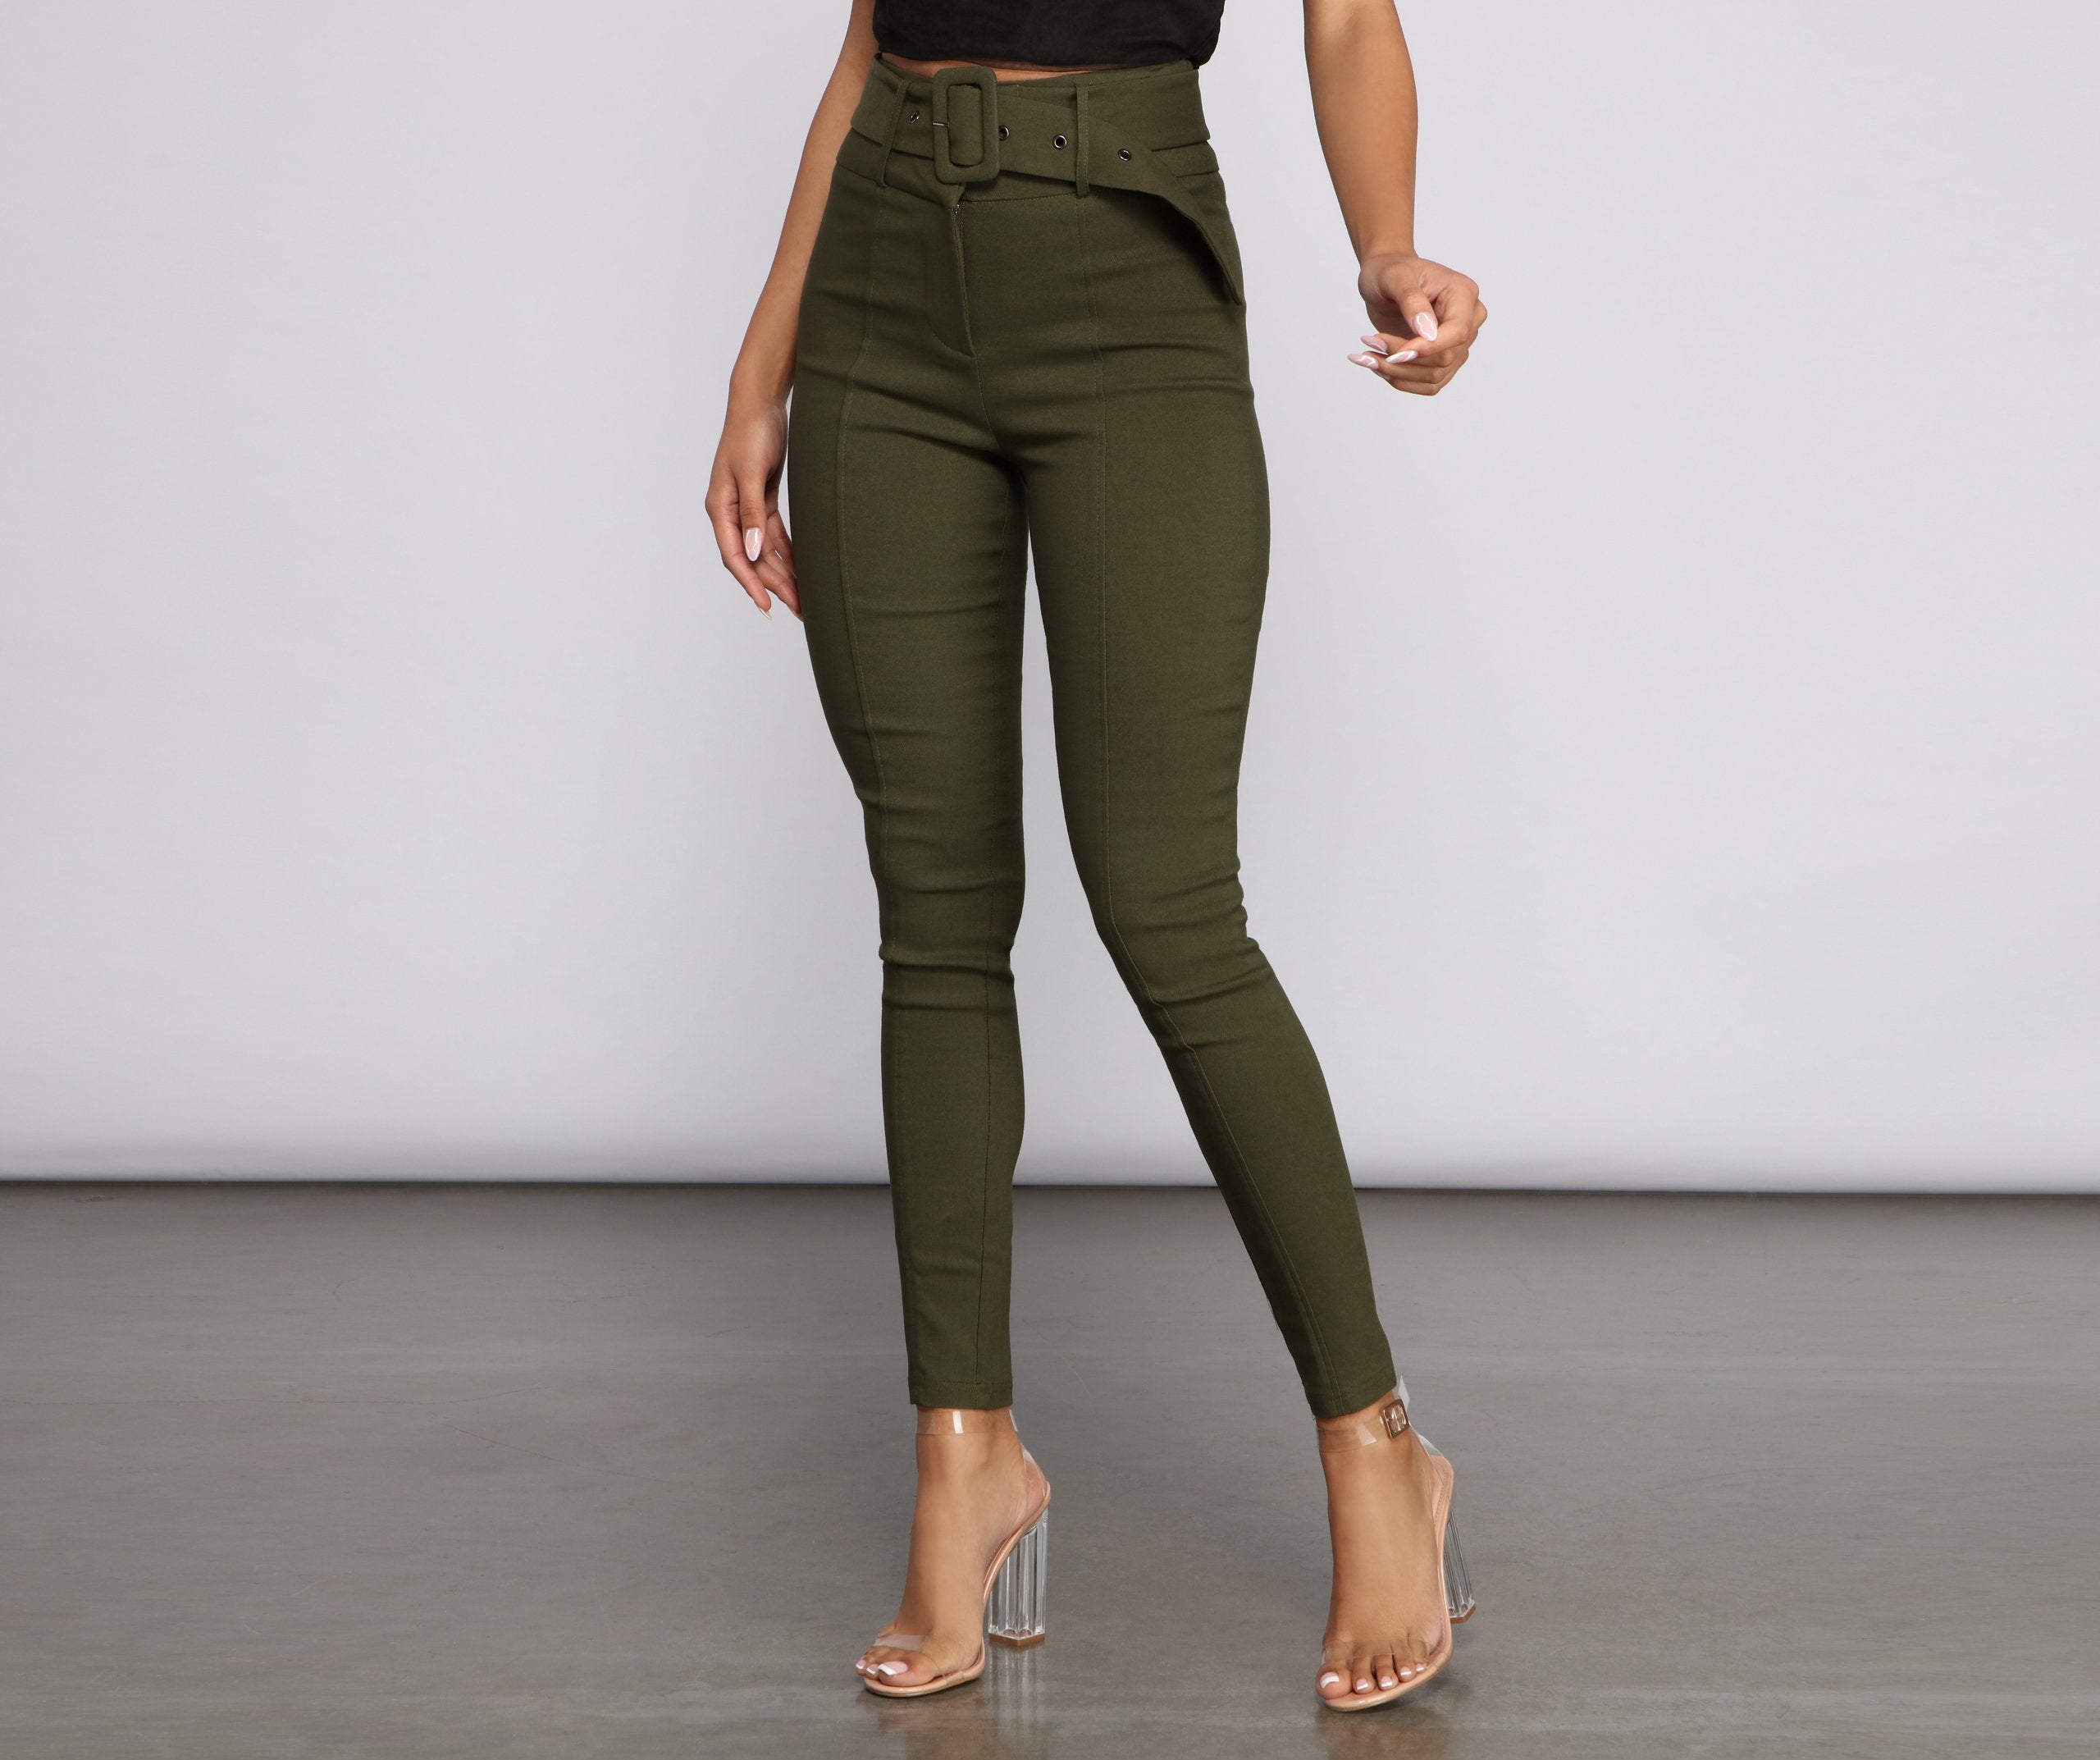 High Waist Belted Skinny Pants - Lady Occasions